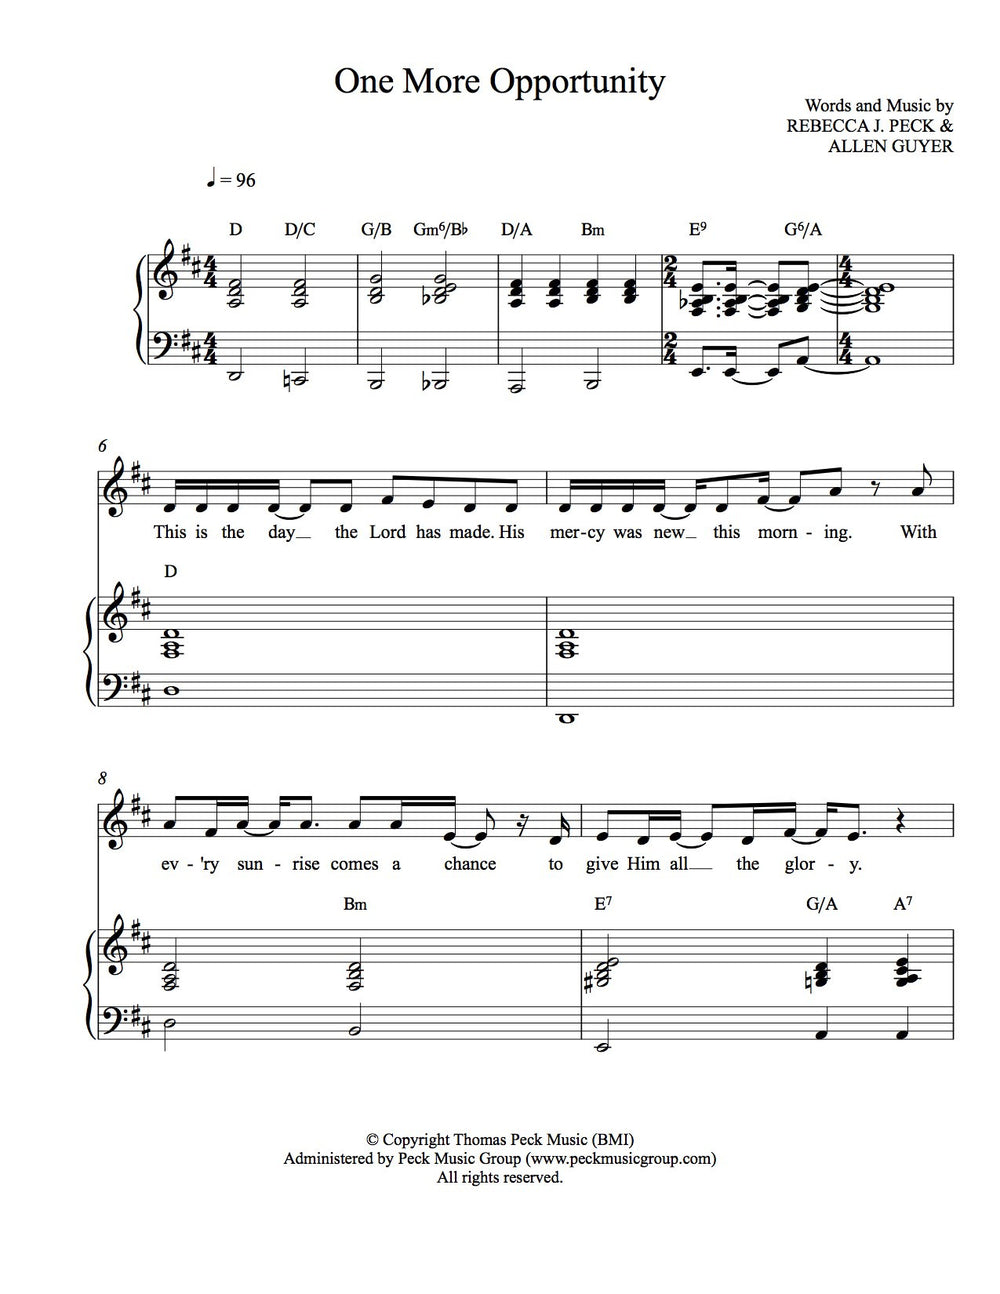 One More Opportunity - sheet music - Digitally Delivered PDF